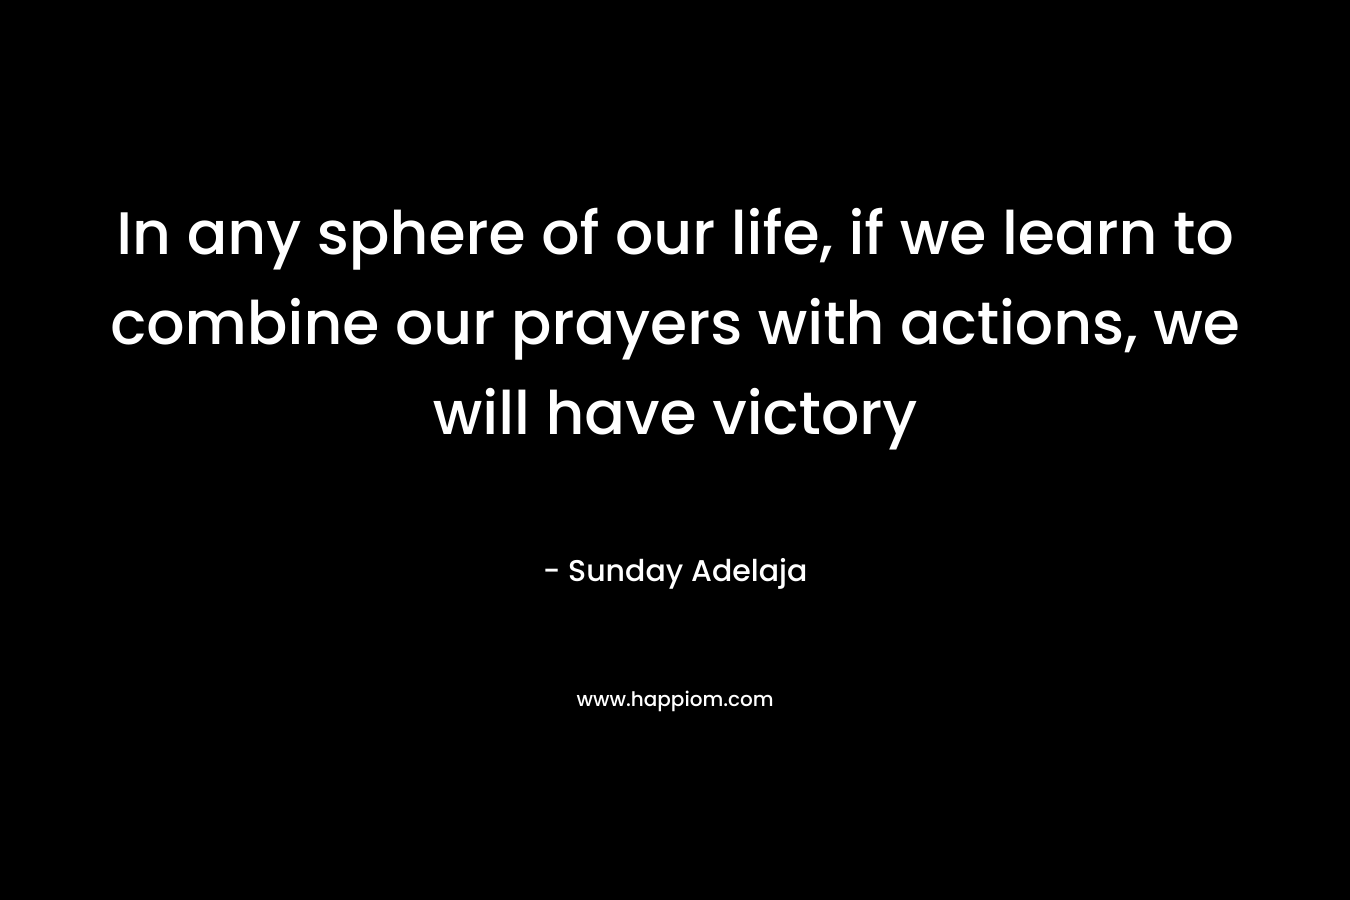 In any sphere of our life, if we learn to combine our prayers with actions, we will have victory – Sunday Adelaja